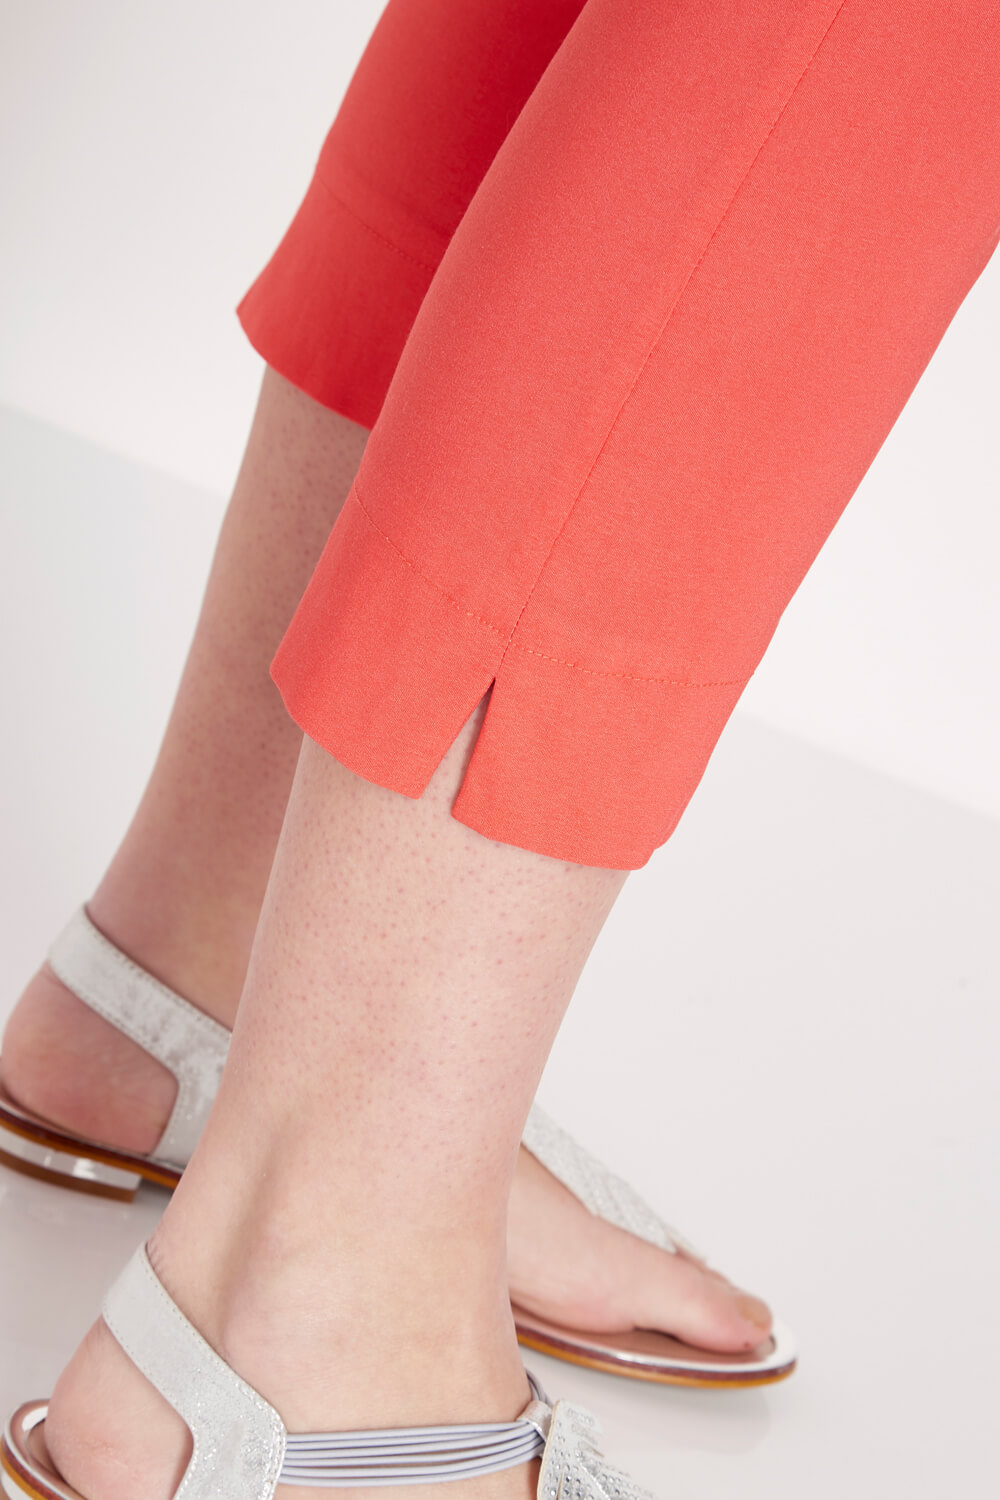 CORAL Cropped Stretch Trouser, Image 4 of 5